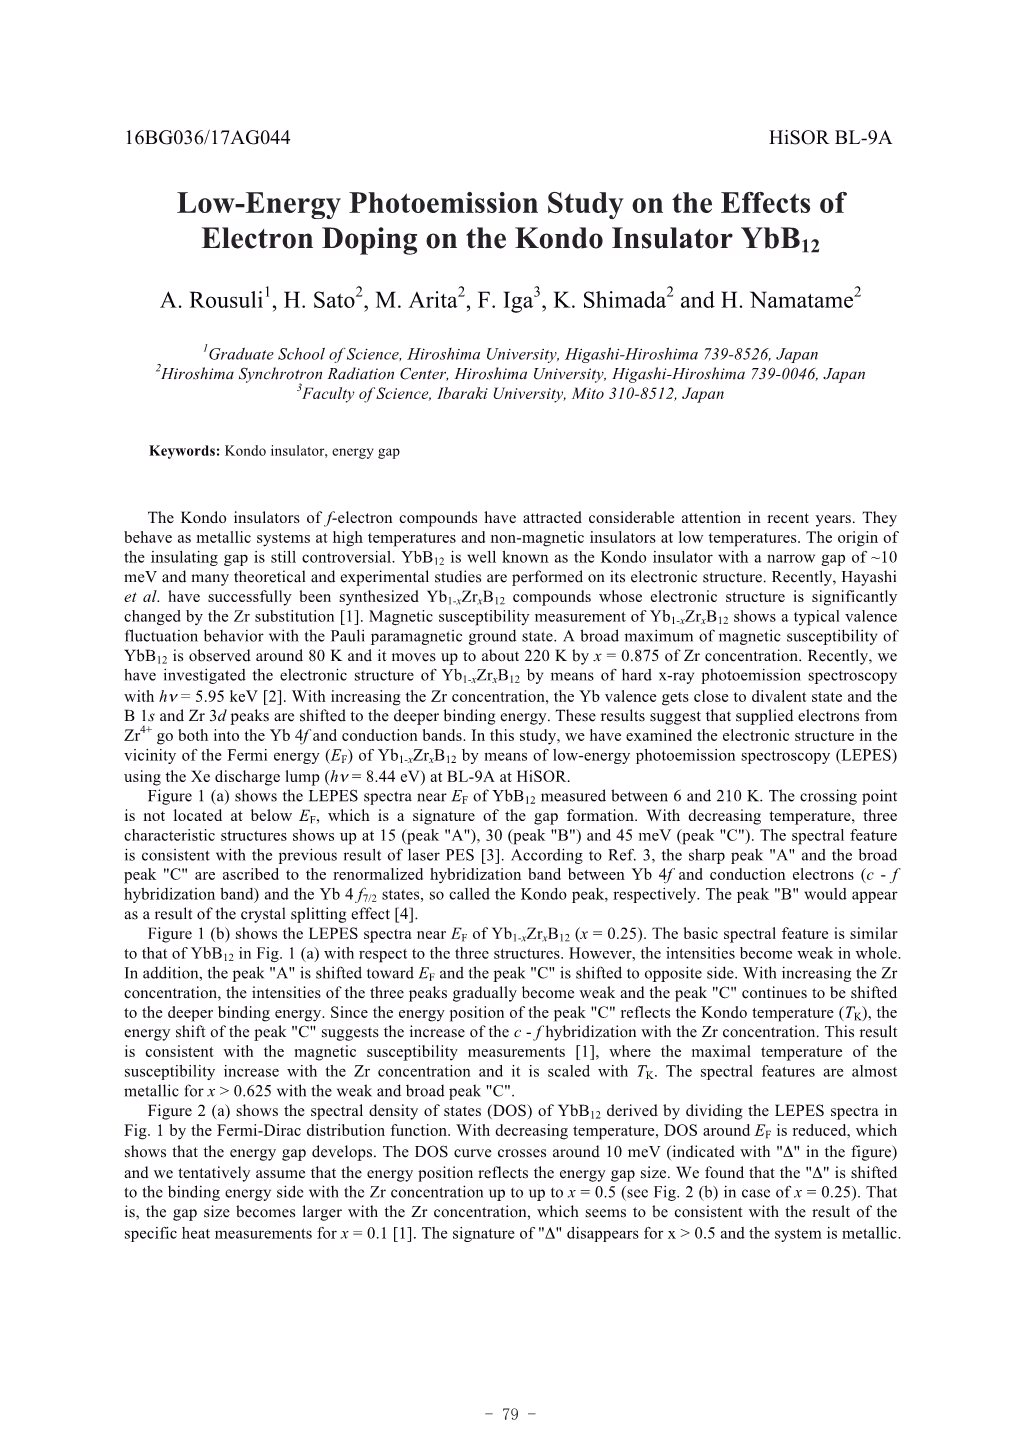 Low-Energy Photoemission Study on the Effects of Electron Doping on the Kondo Insulator Ybb12